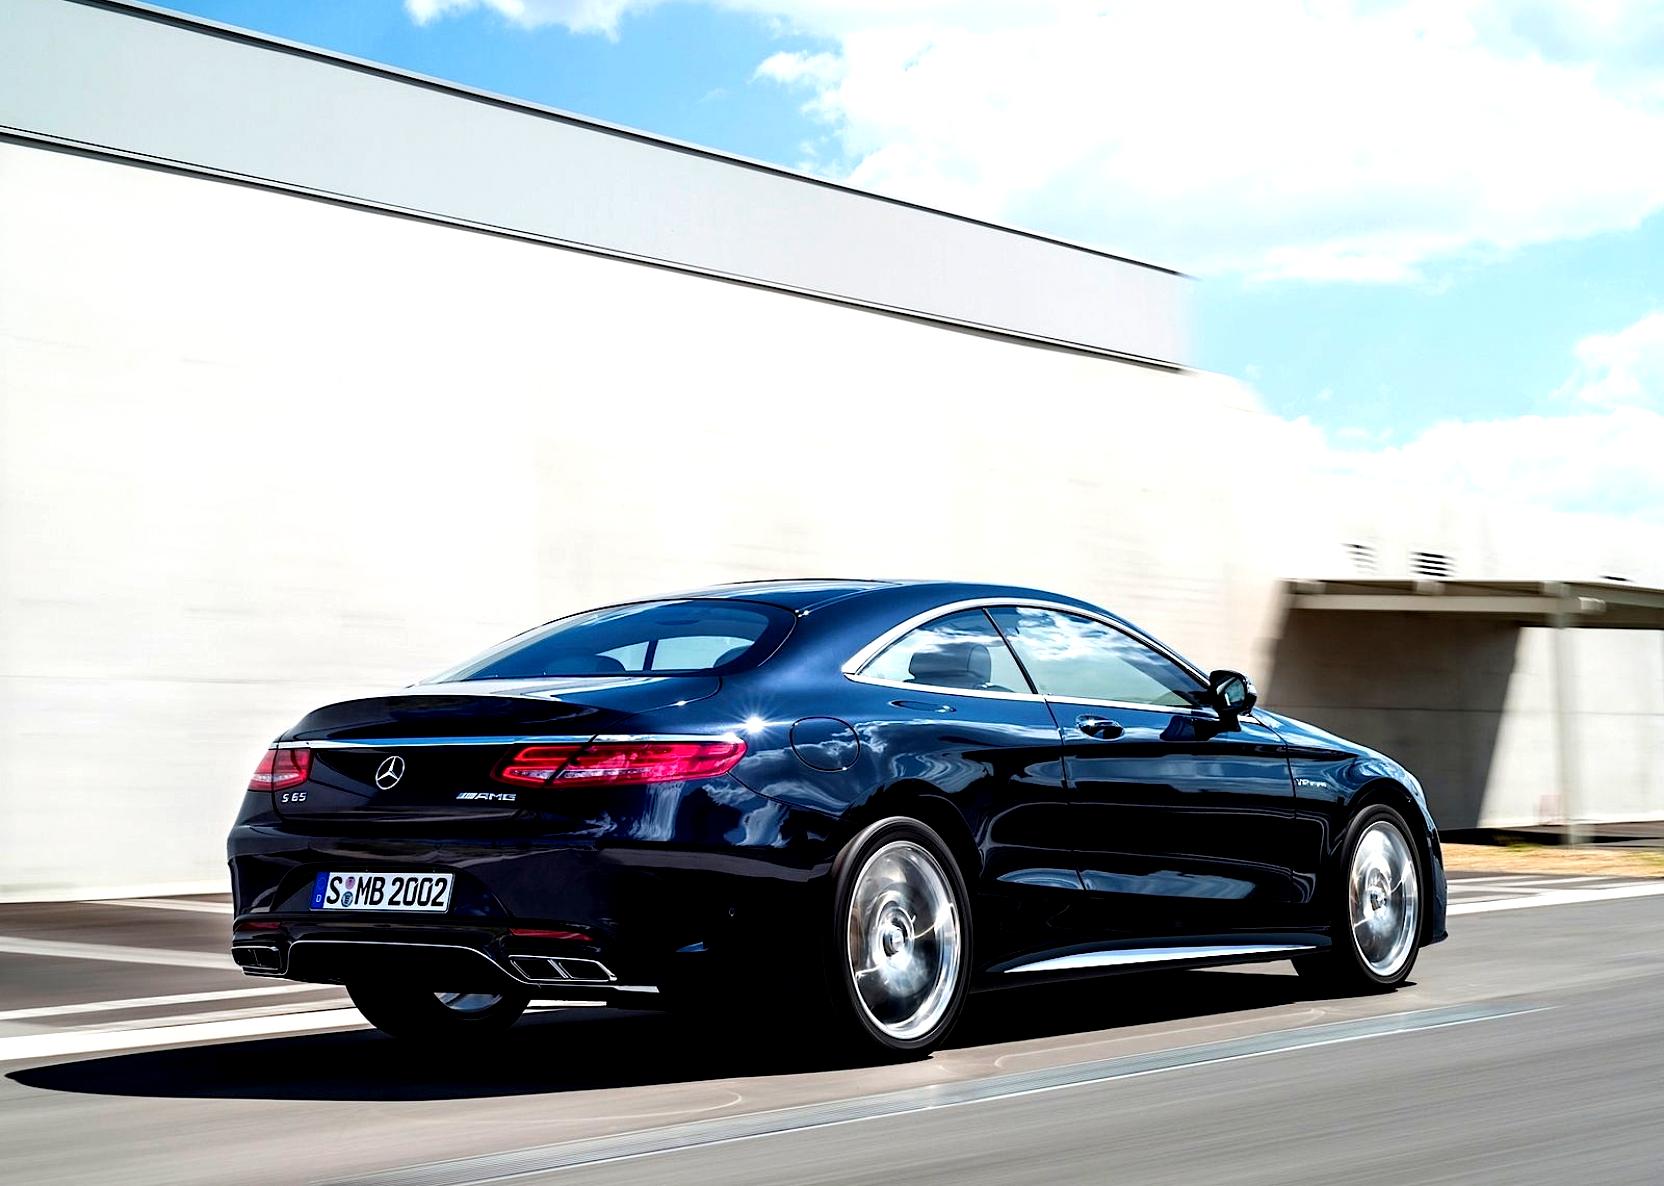 Mercedes Benz S 65 AMG Coupe 2014 #16